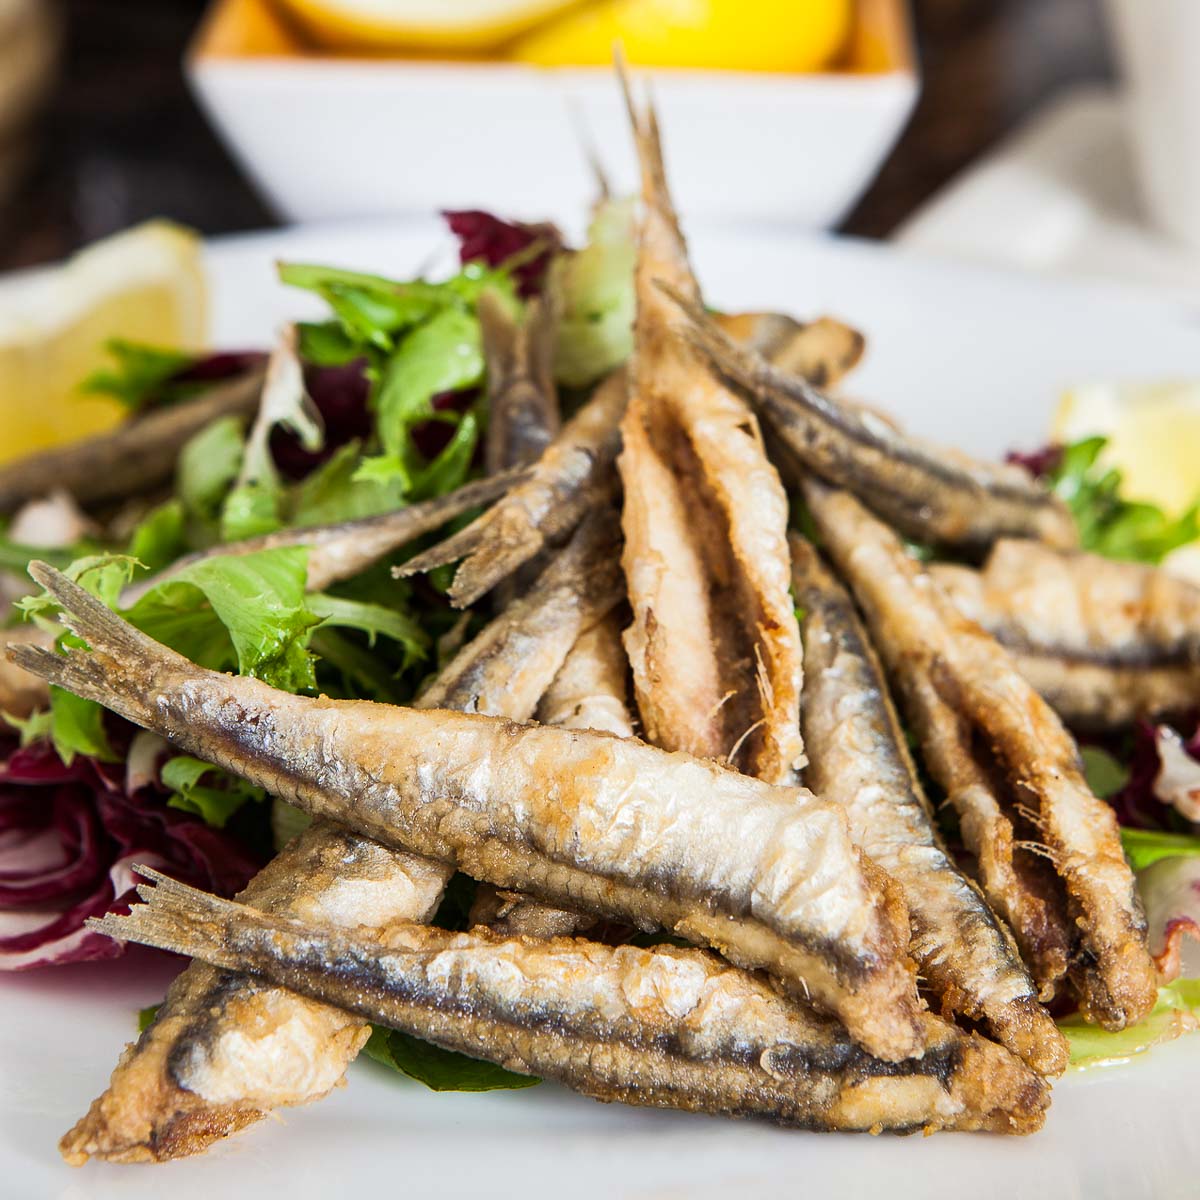 Plate of crispy fried anchovies over salad.